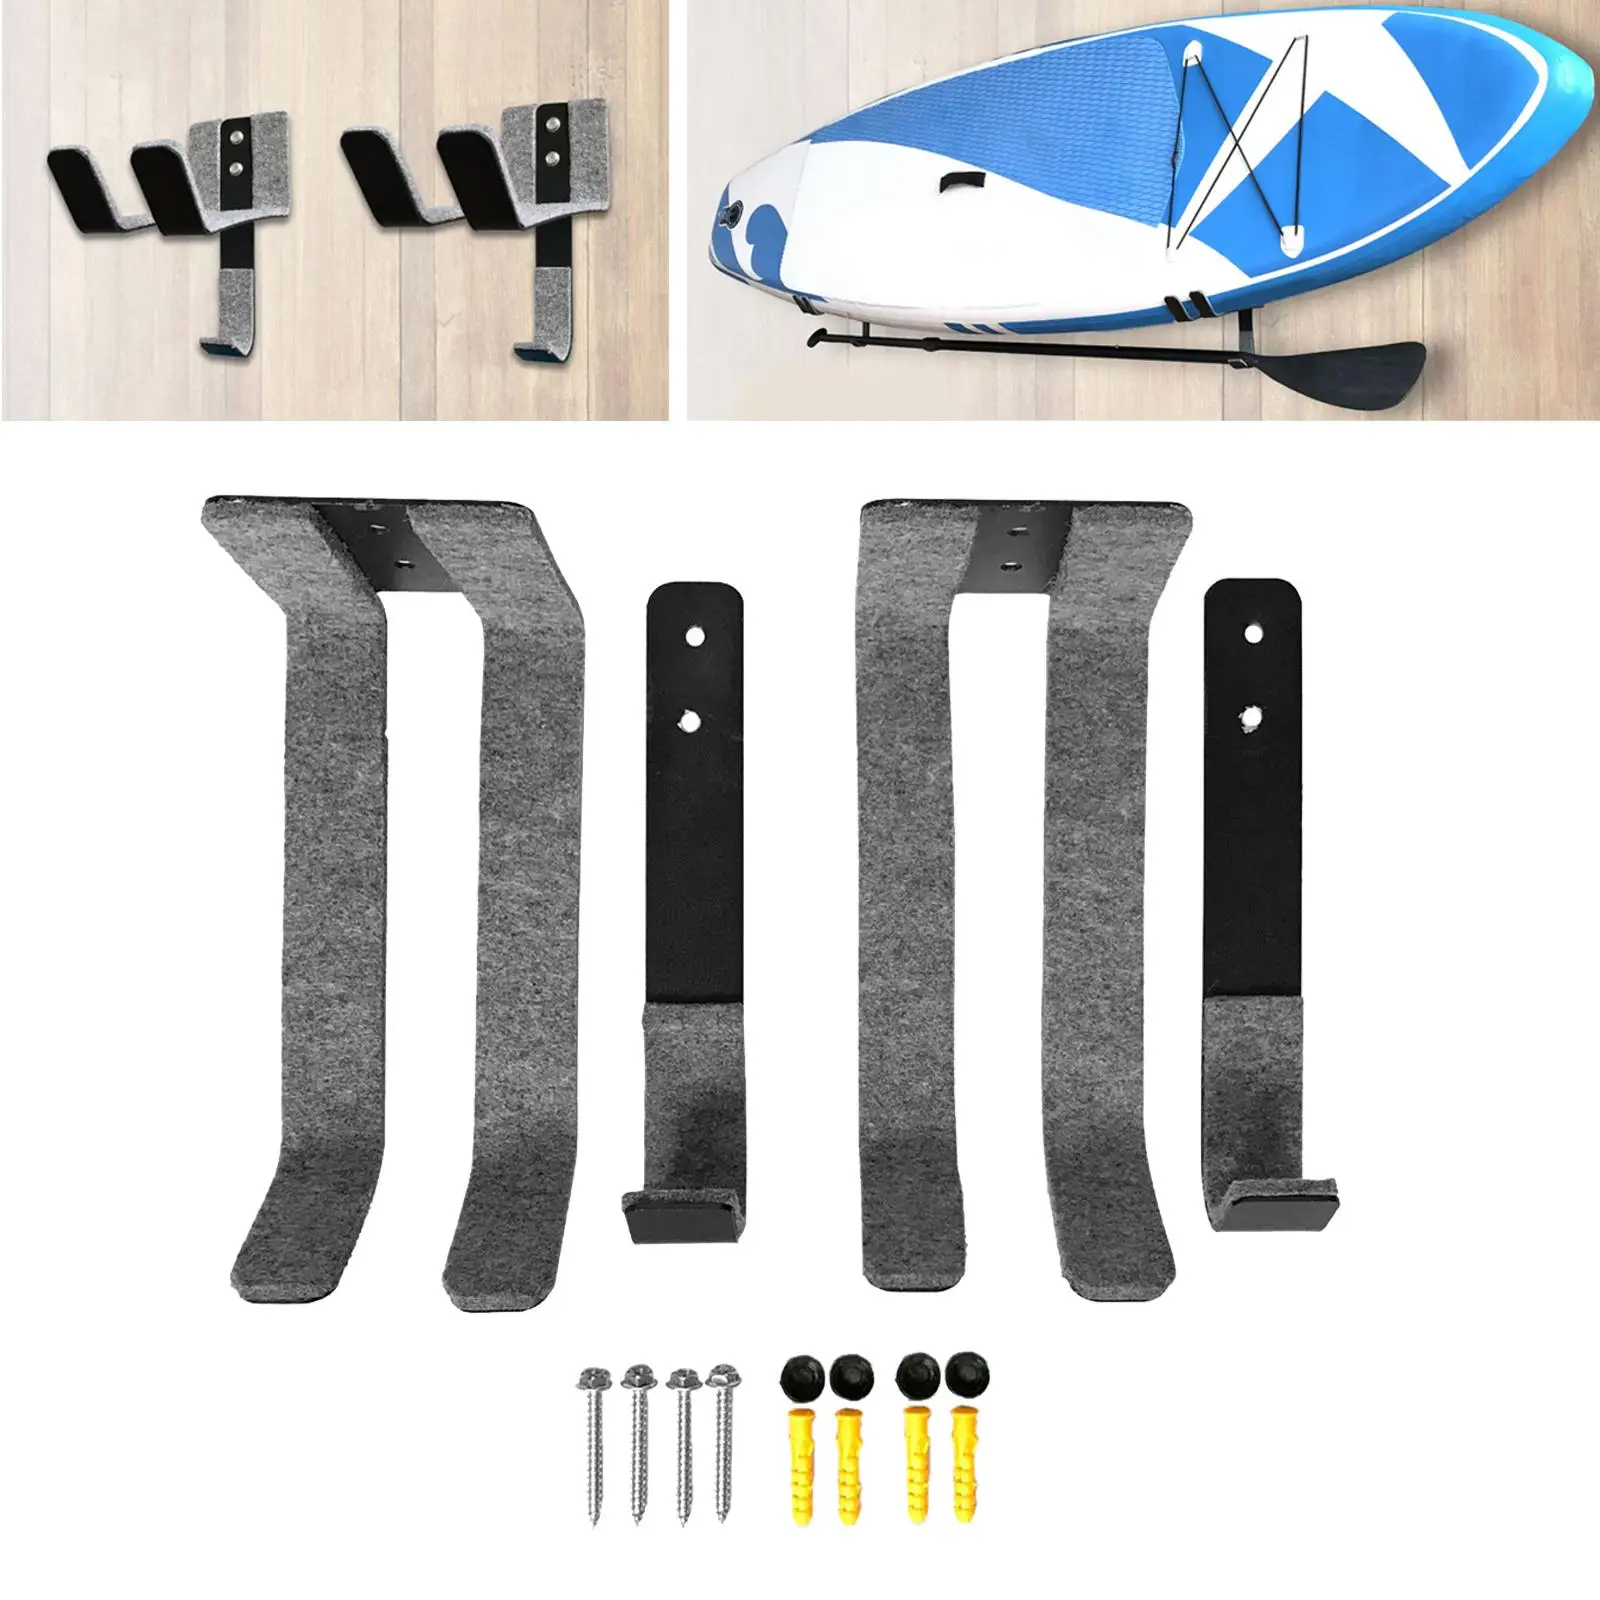 Metal Surf Board Rack Holds Both Long Boards and Short Boards with Foam